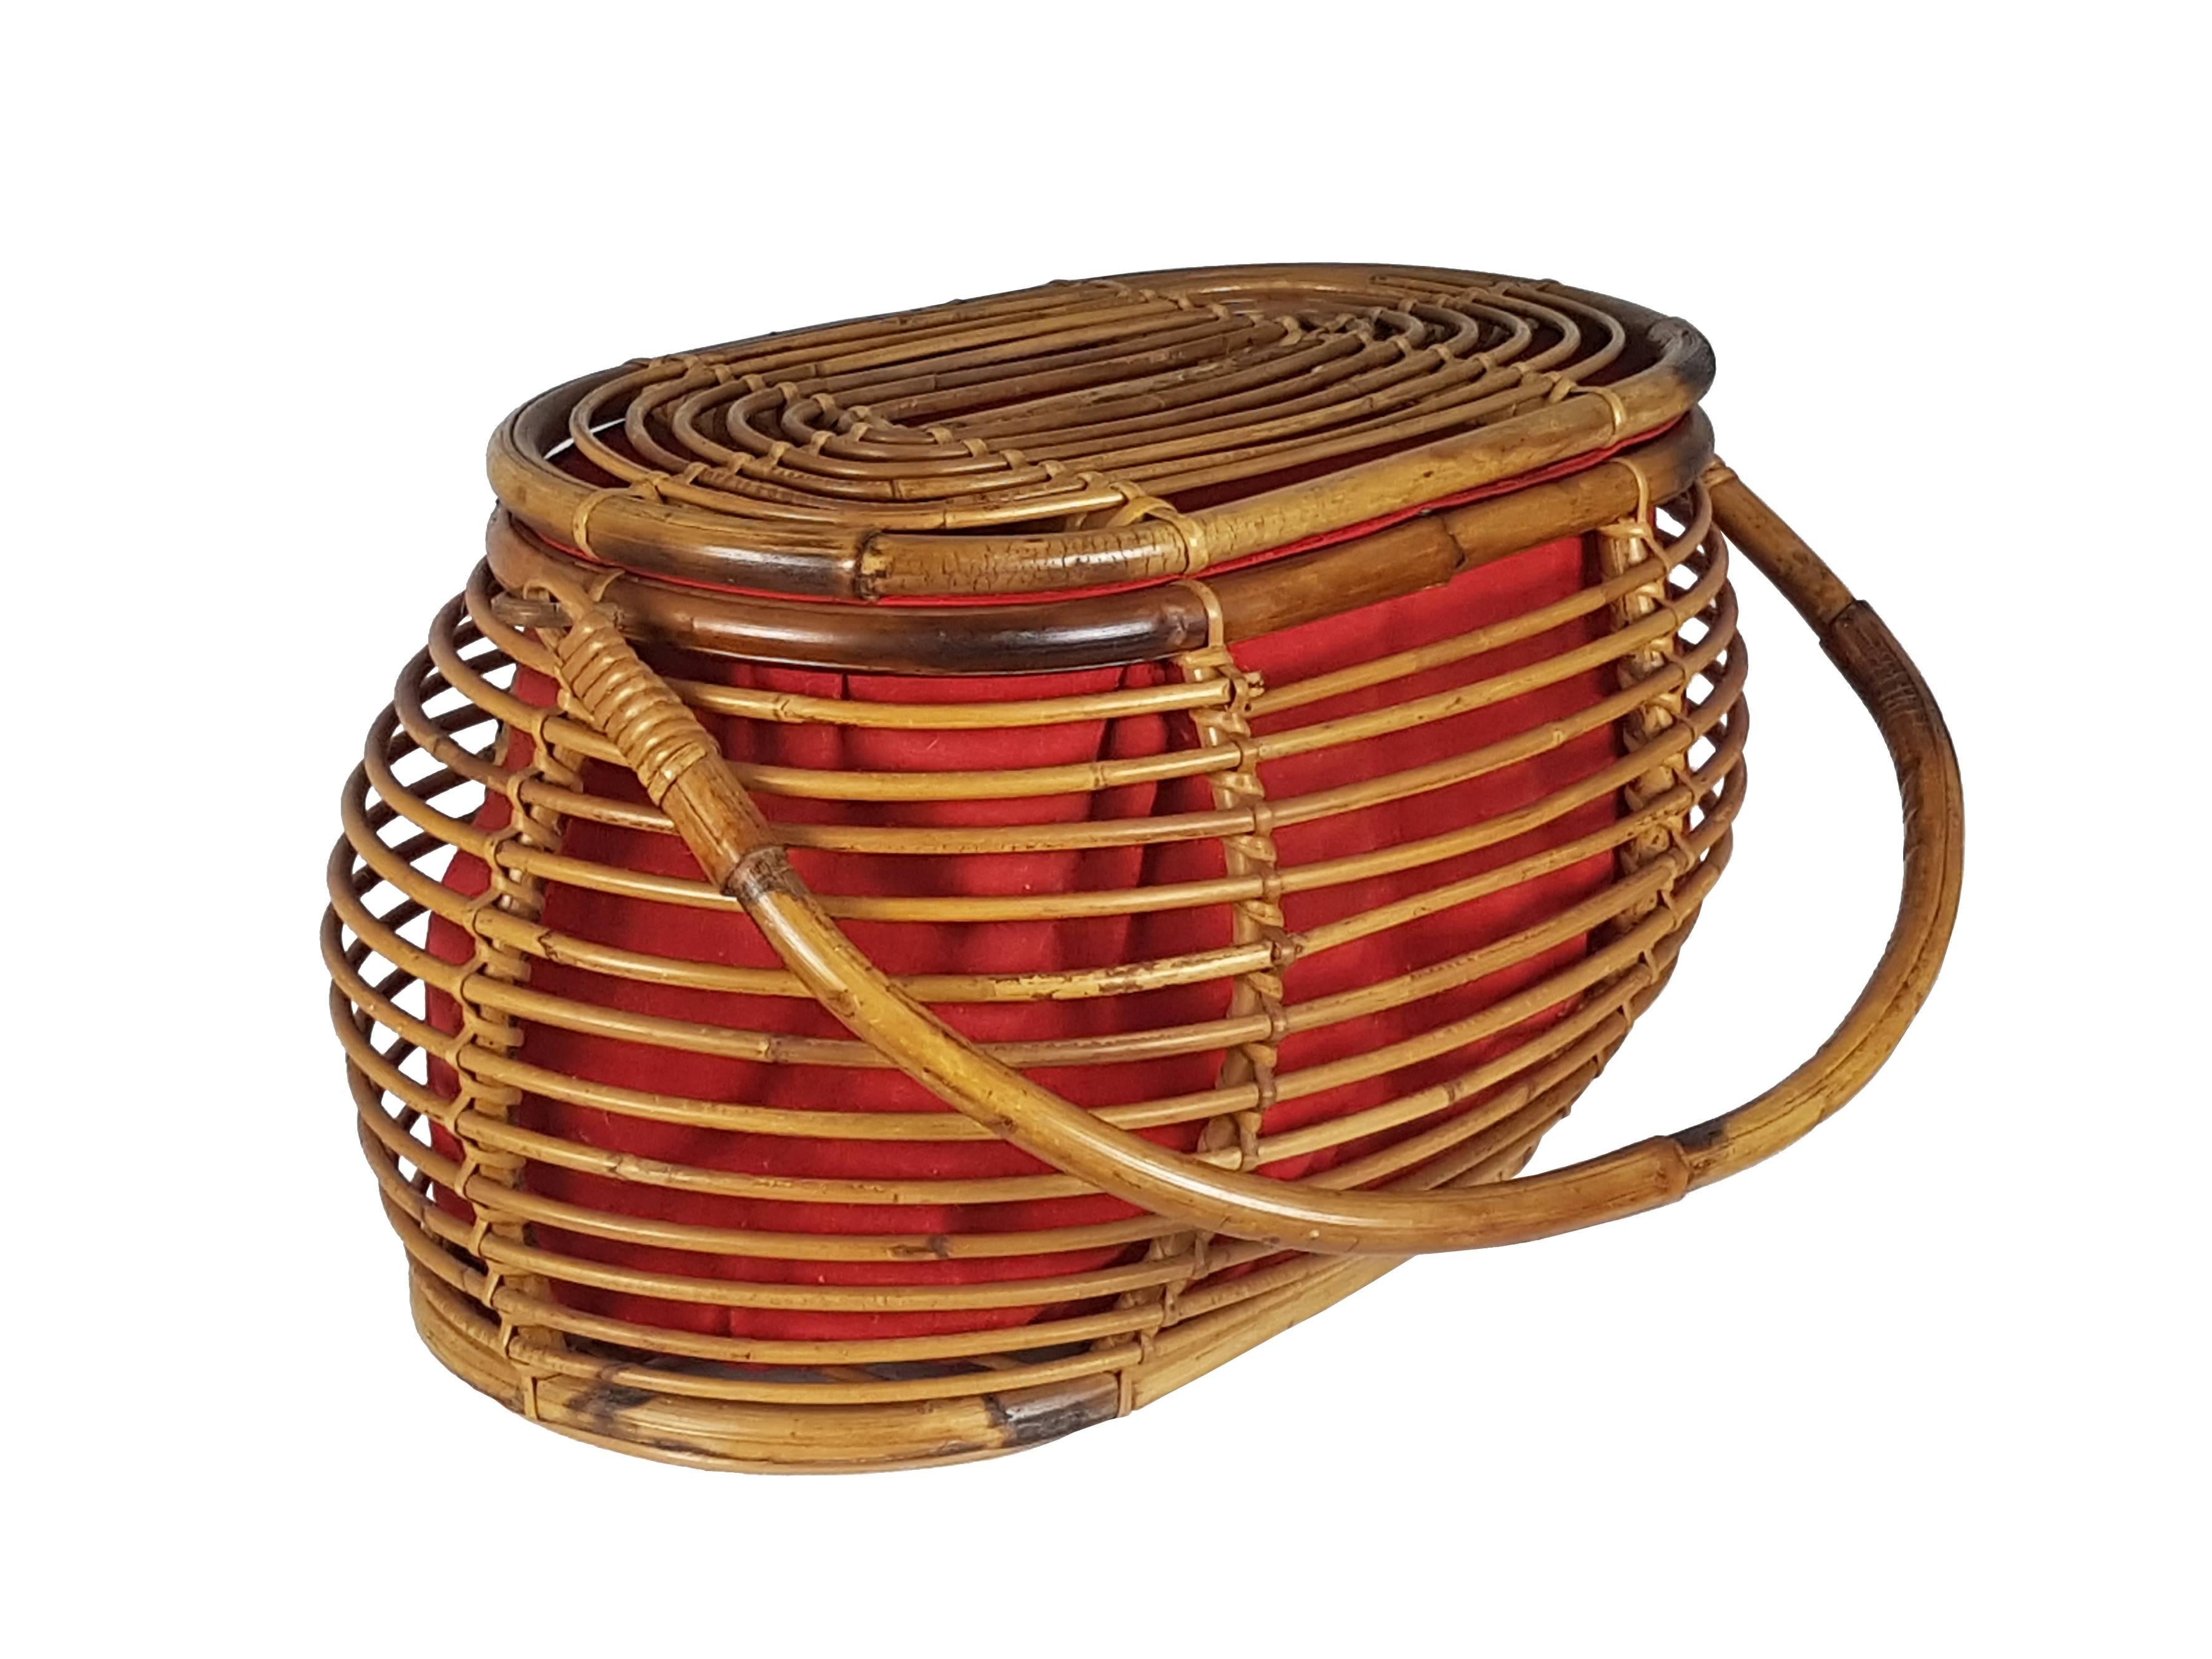 This vintage box is made from a rattan frame with a red fabric bag. It features a useful lid and practice handle. It can be used as a magazine rack or as a generic glove box. Its style and quality resembles similar Bonacina products. Good vintage